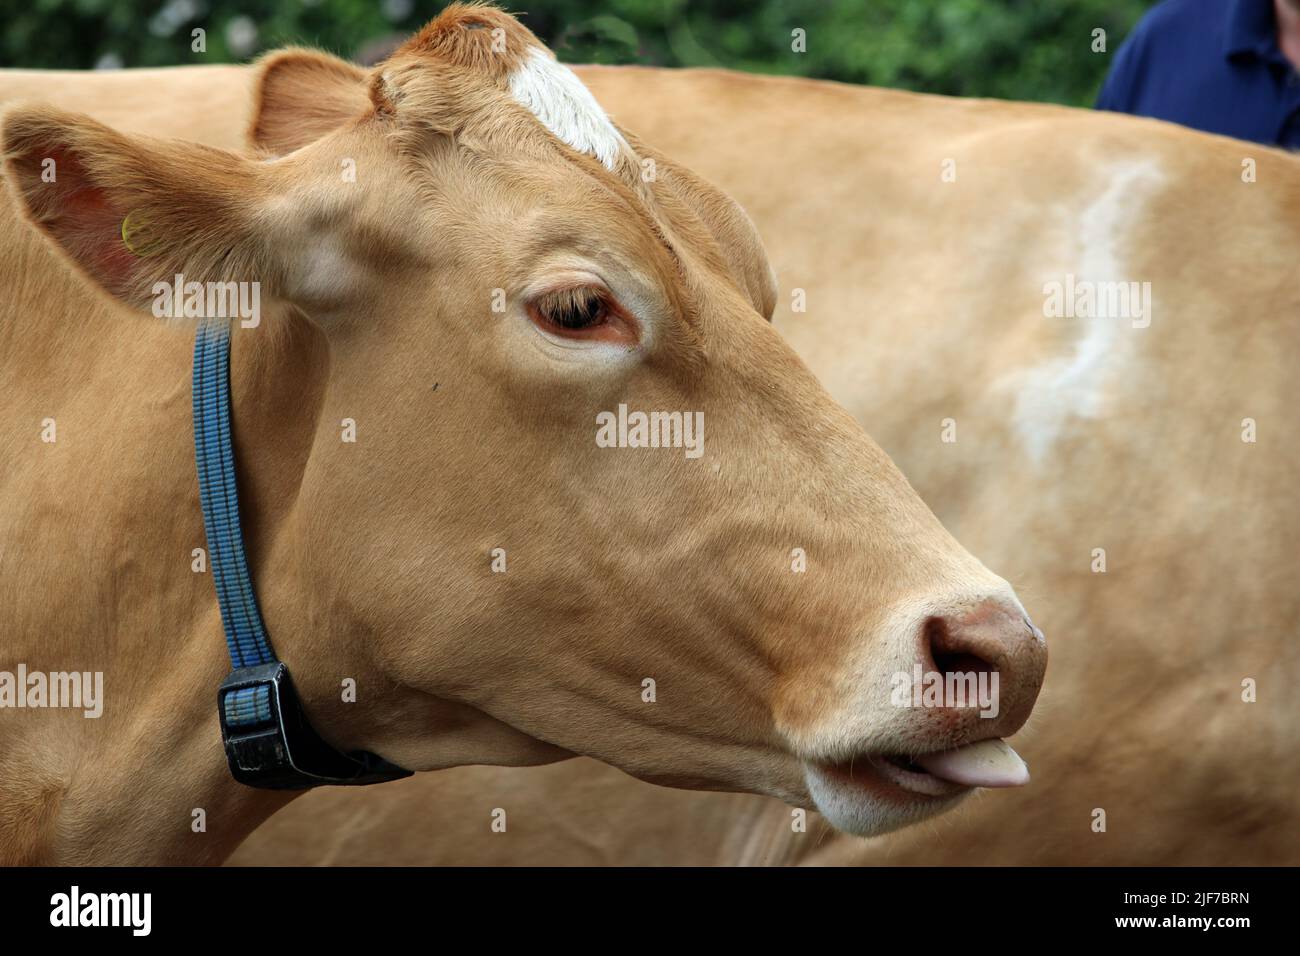 Light brown Guernsey cow head and shoulders with a blue collar and another cow in the background. Stock Photo